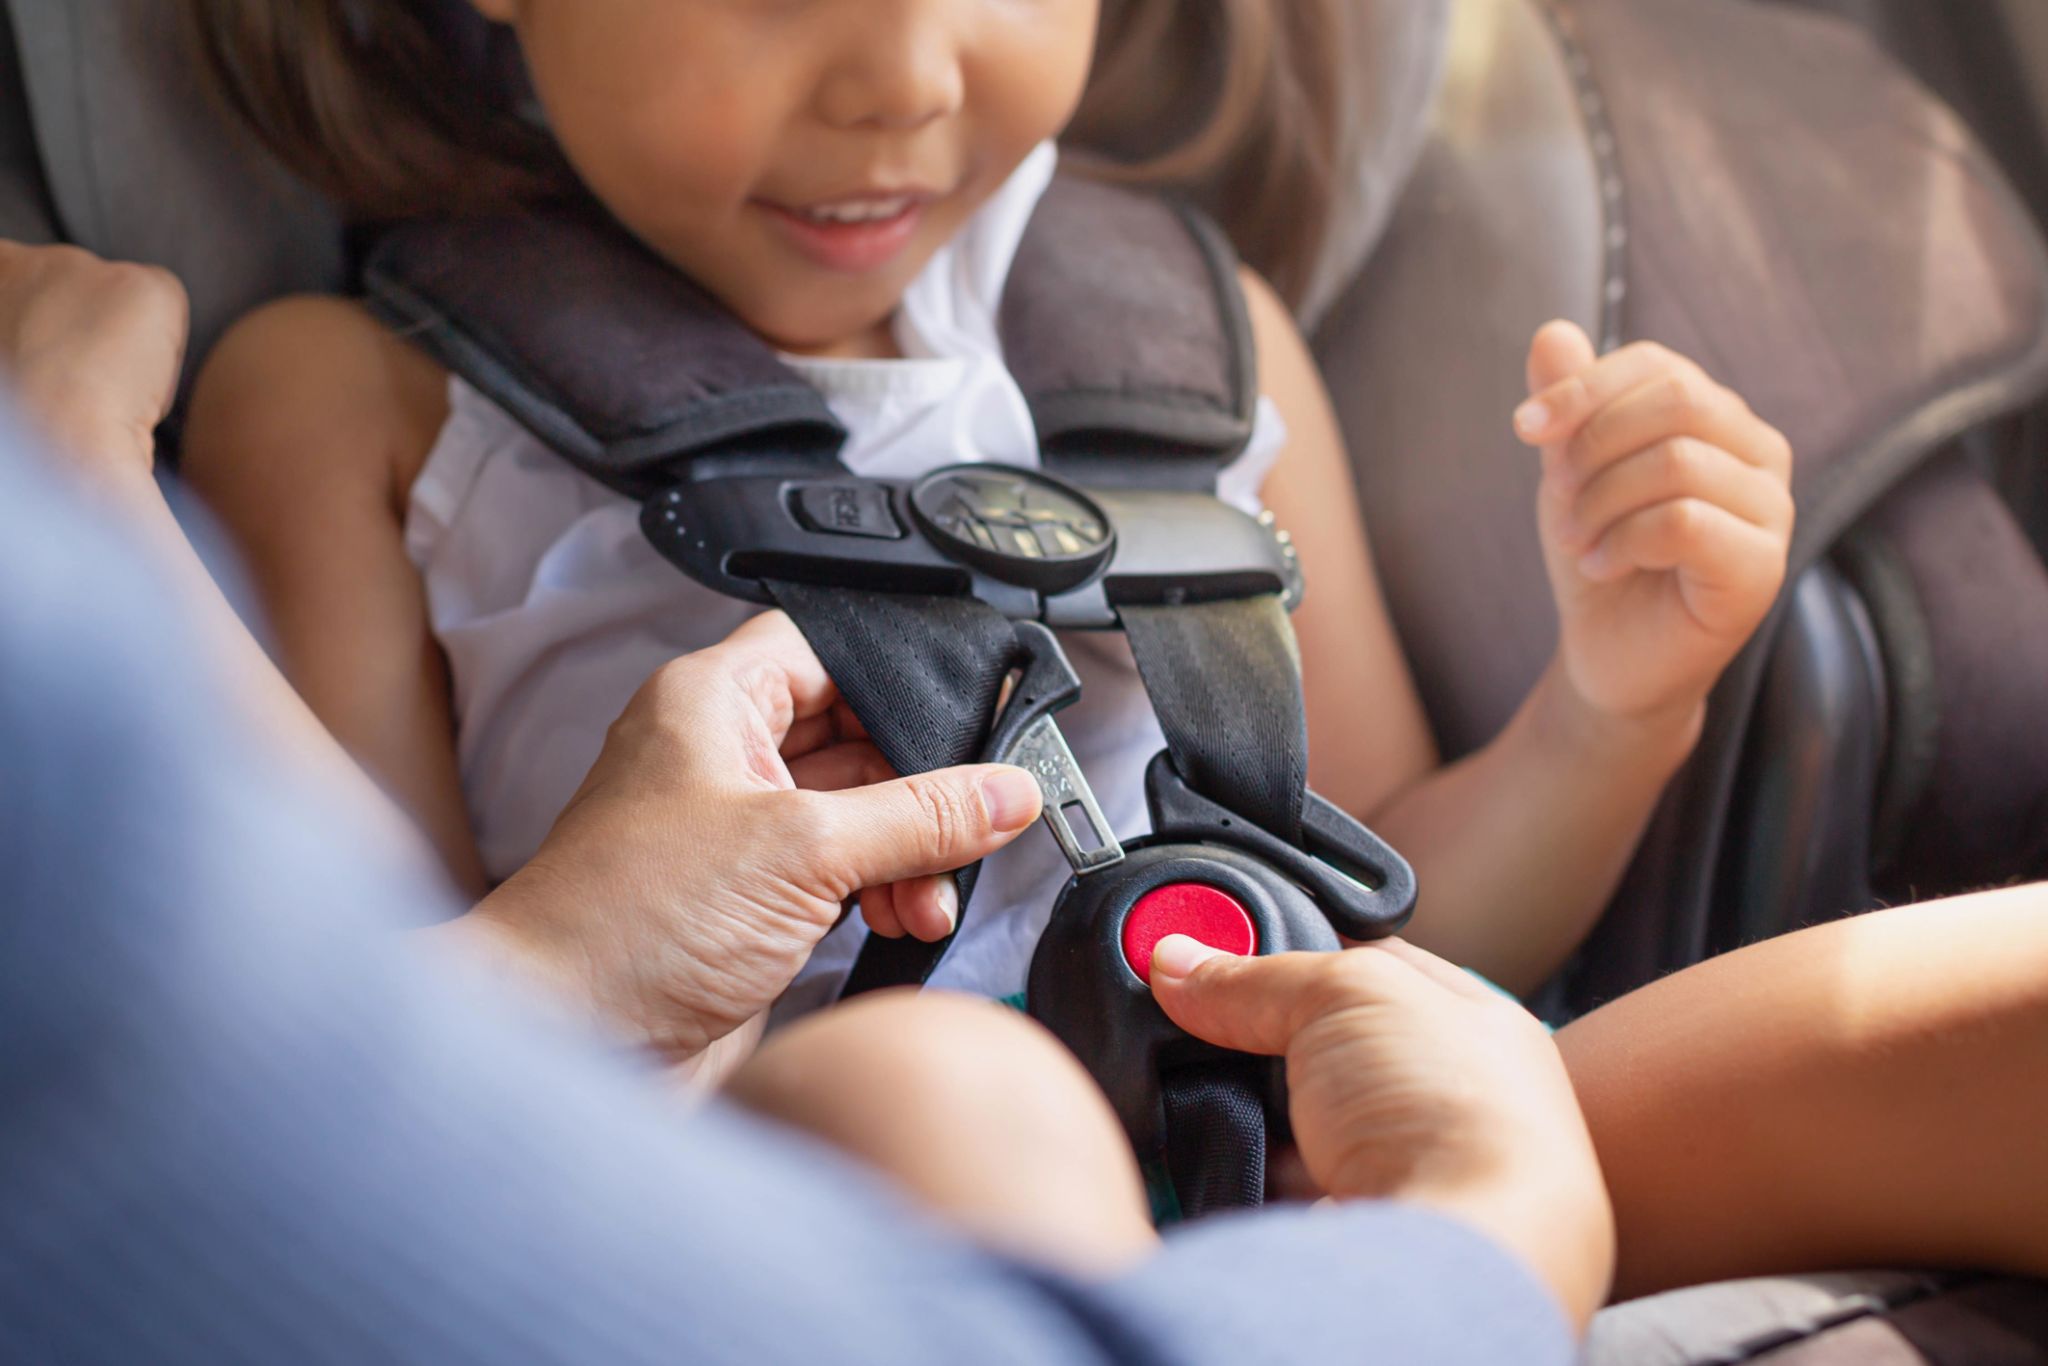 CHILD CAR SEAT SAFETY TIPS EVERYTHING YOU NEED TO KNOW